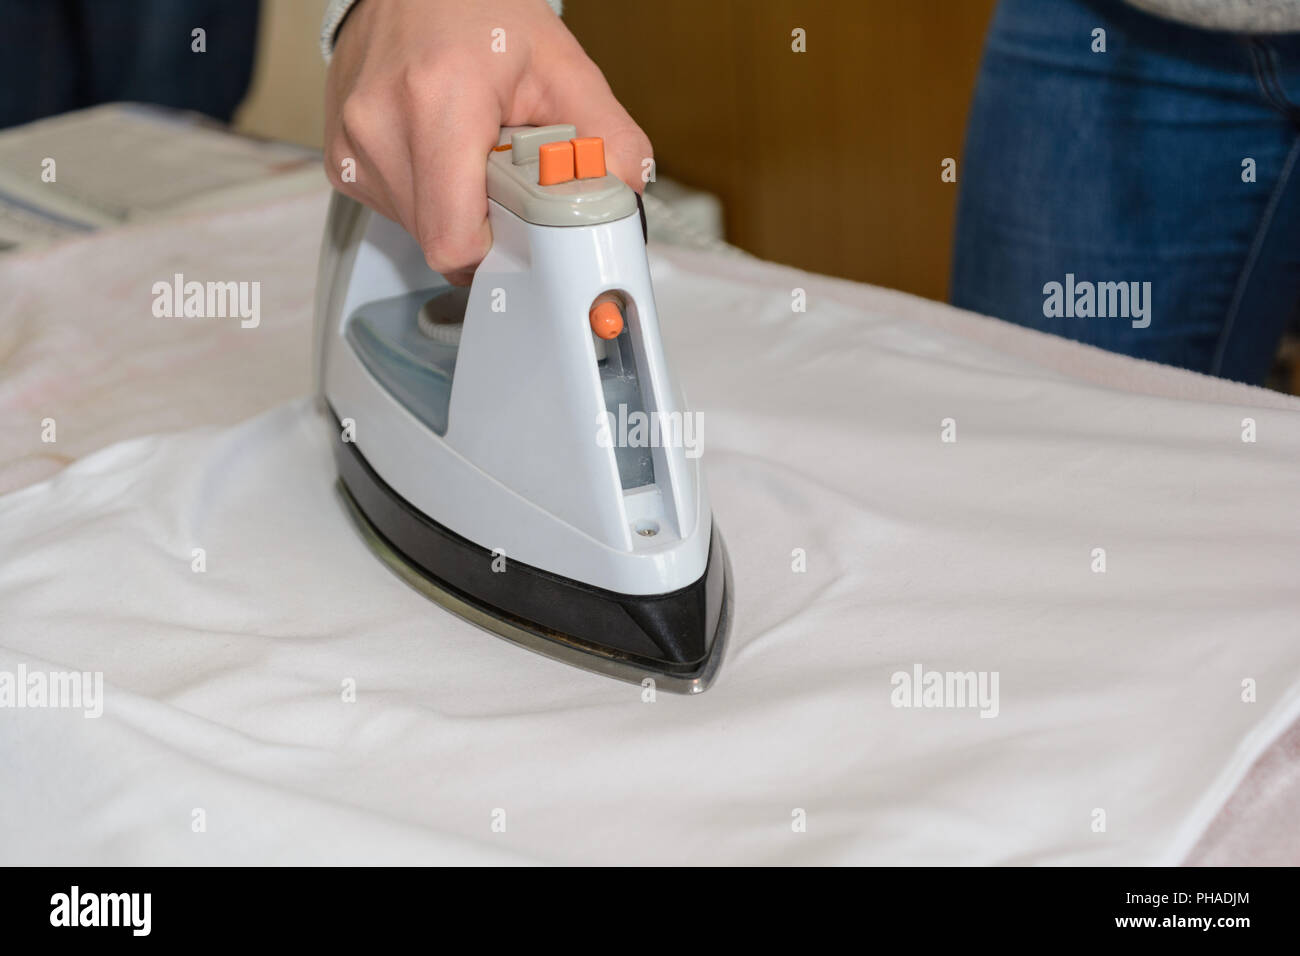 Iron and Spray Bottles on Table, Preparing To Ironing Cloth. Stock Image -  Image of caucasian, full: 233945807